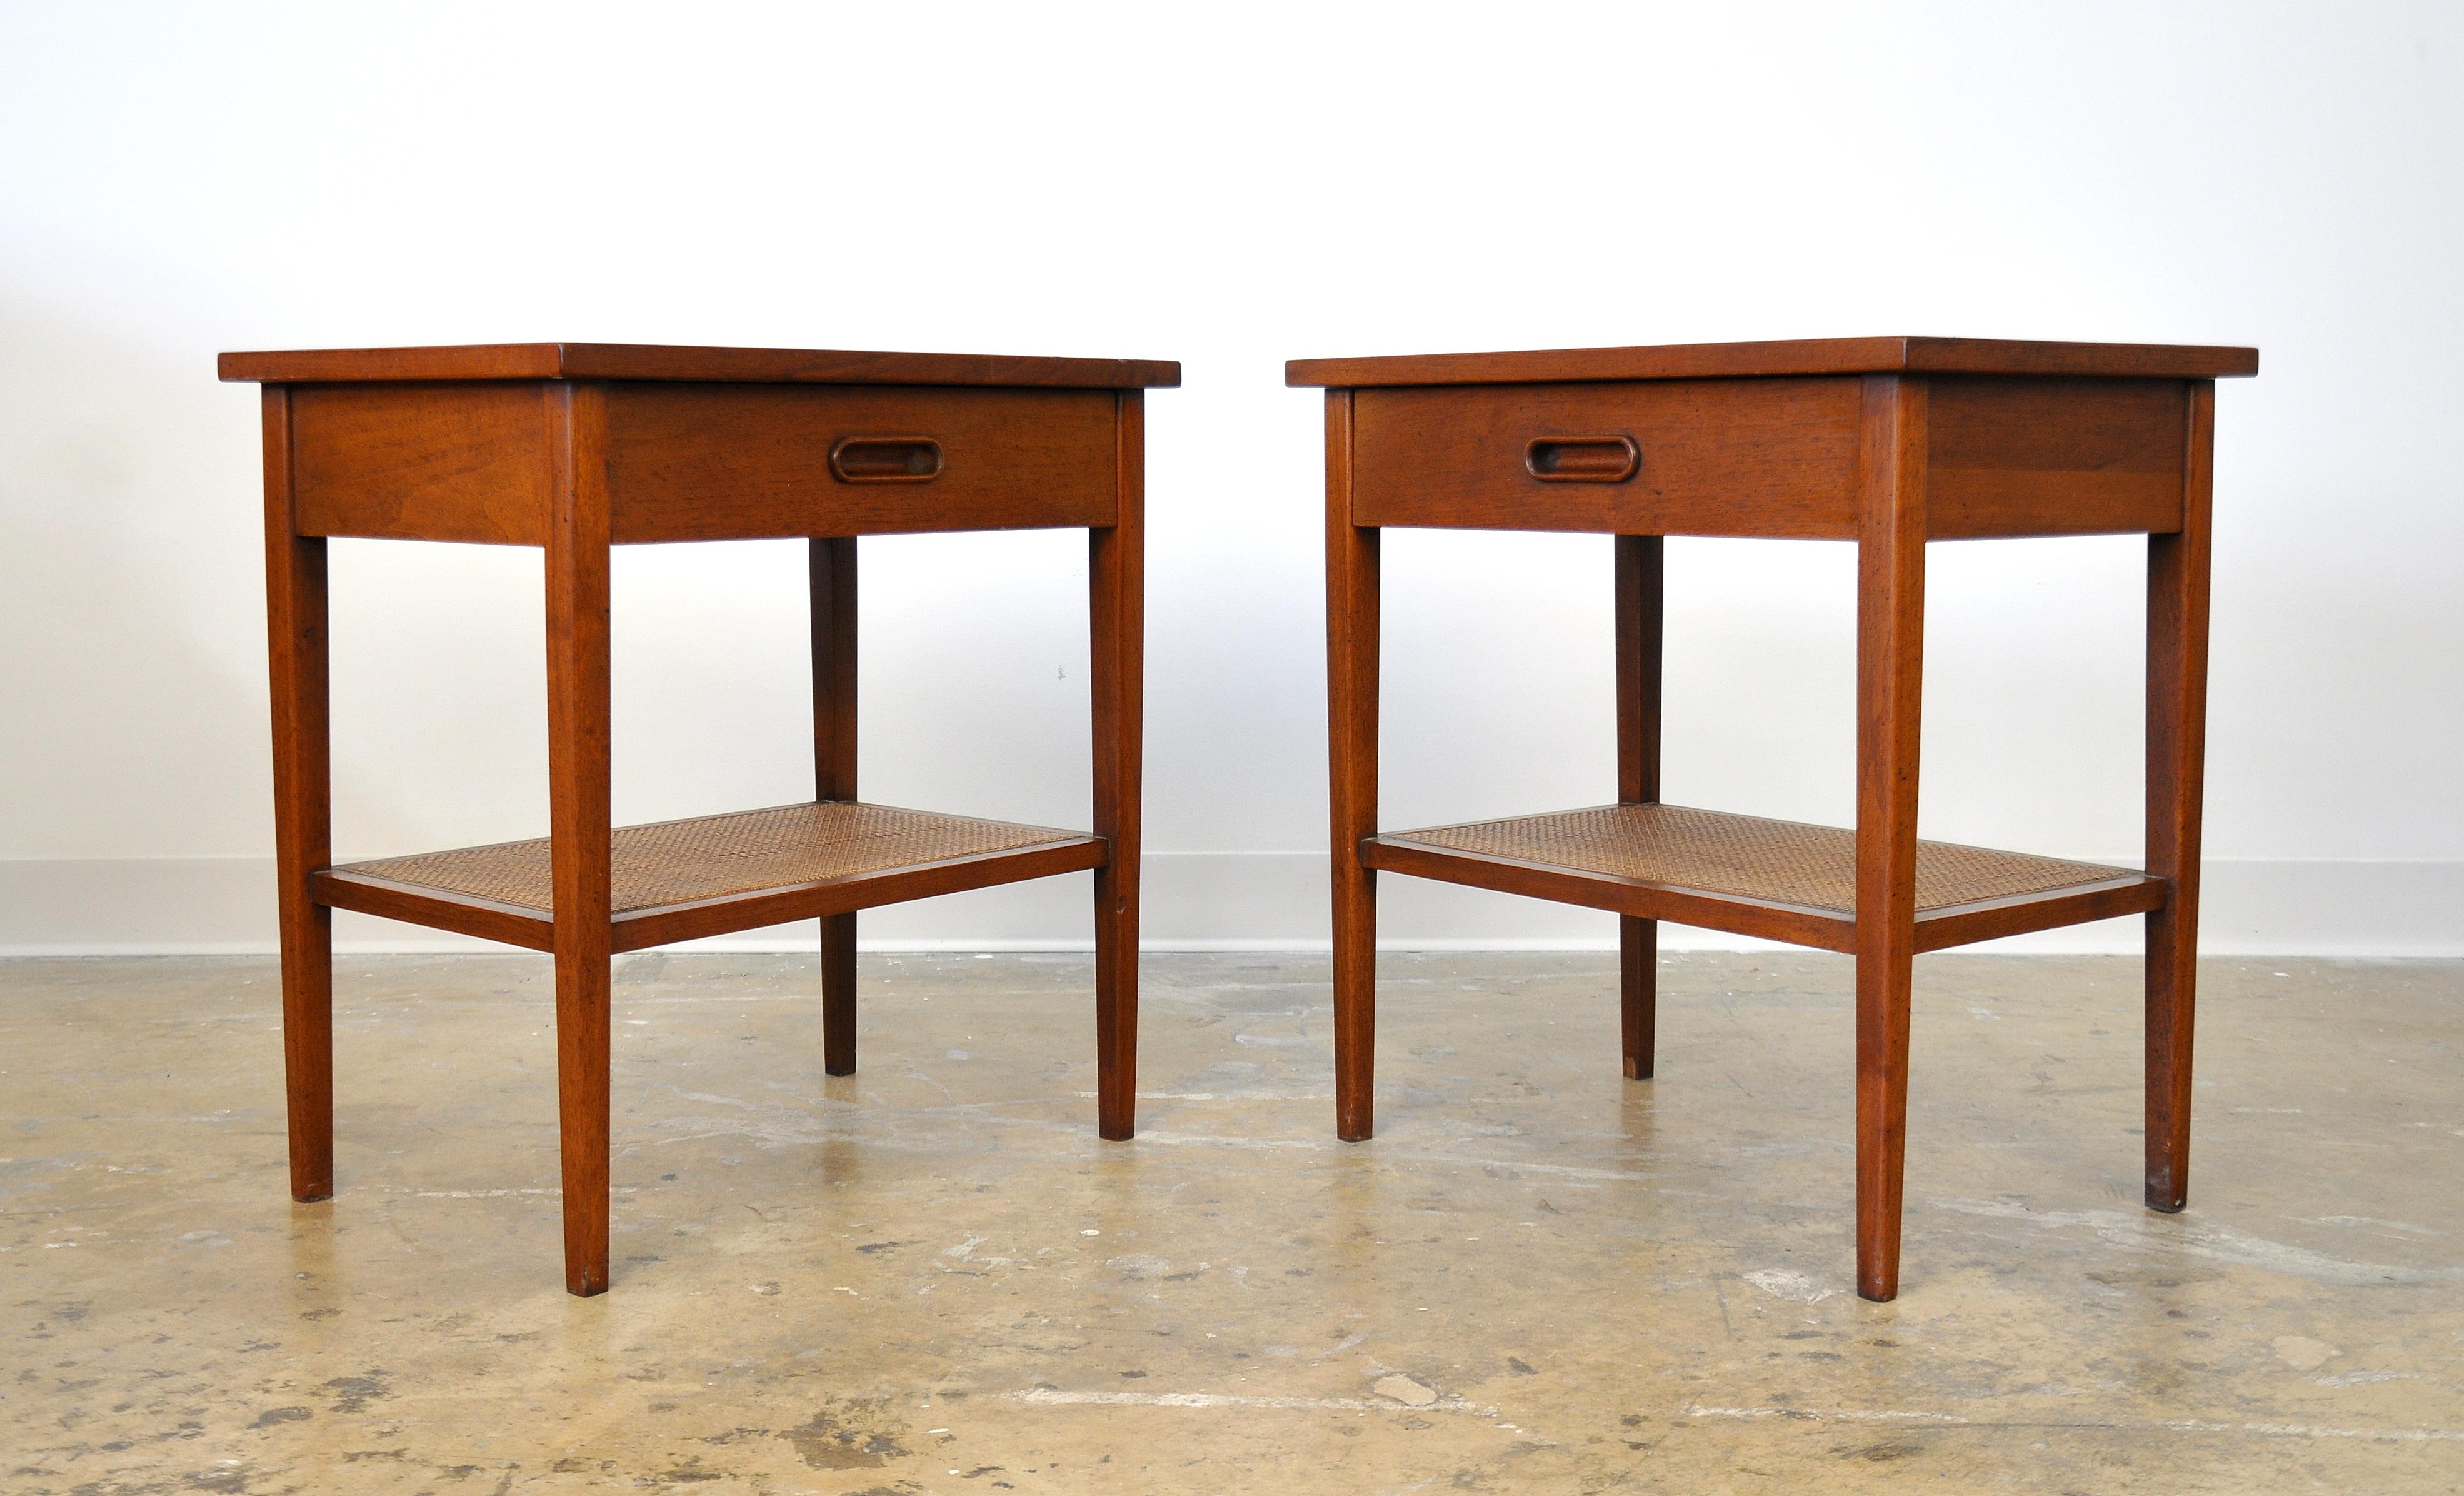 A great pair of vintage Mid-Century Modern two-tier side, end, occasional or bedside tables designed by Jack Cartwright for Founders Furniture in the 1960s. Two-tiered, fitted with a caned magazine shelf; the drawer fronts of the night stands fitted